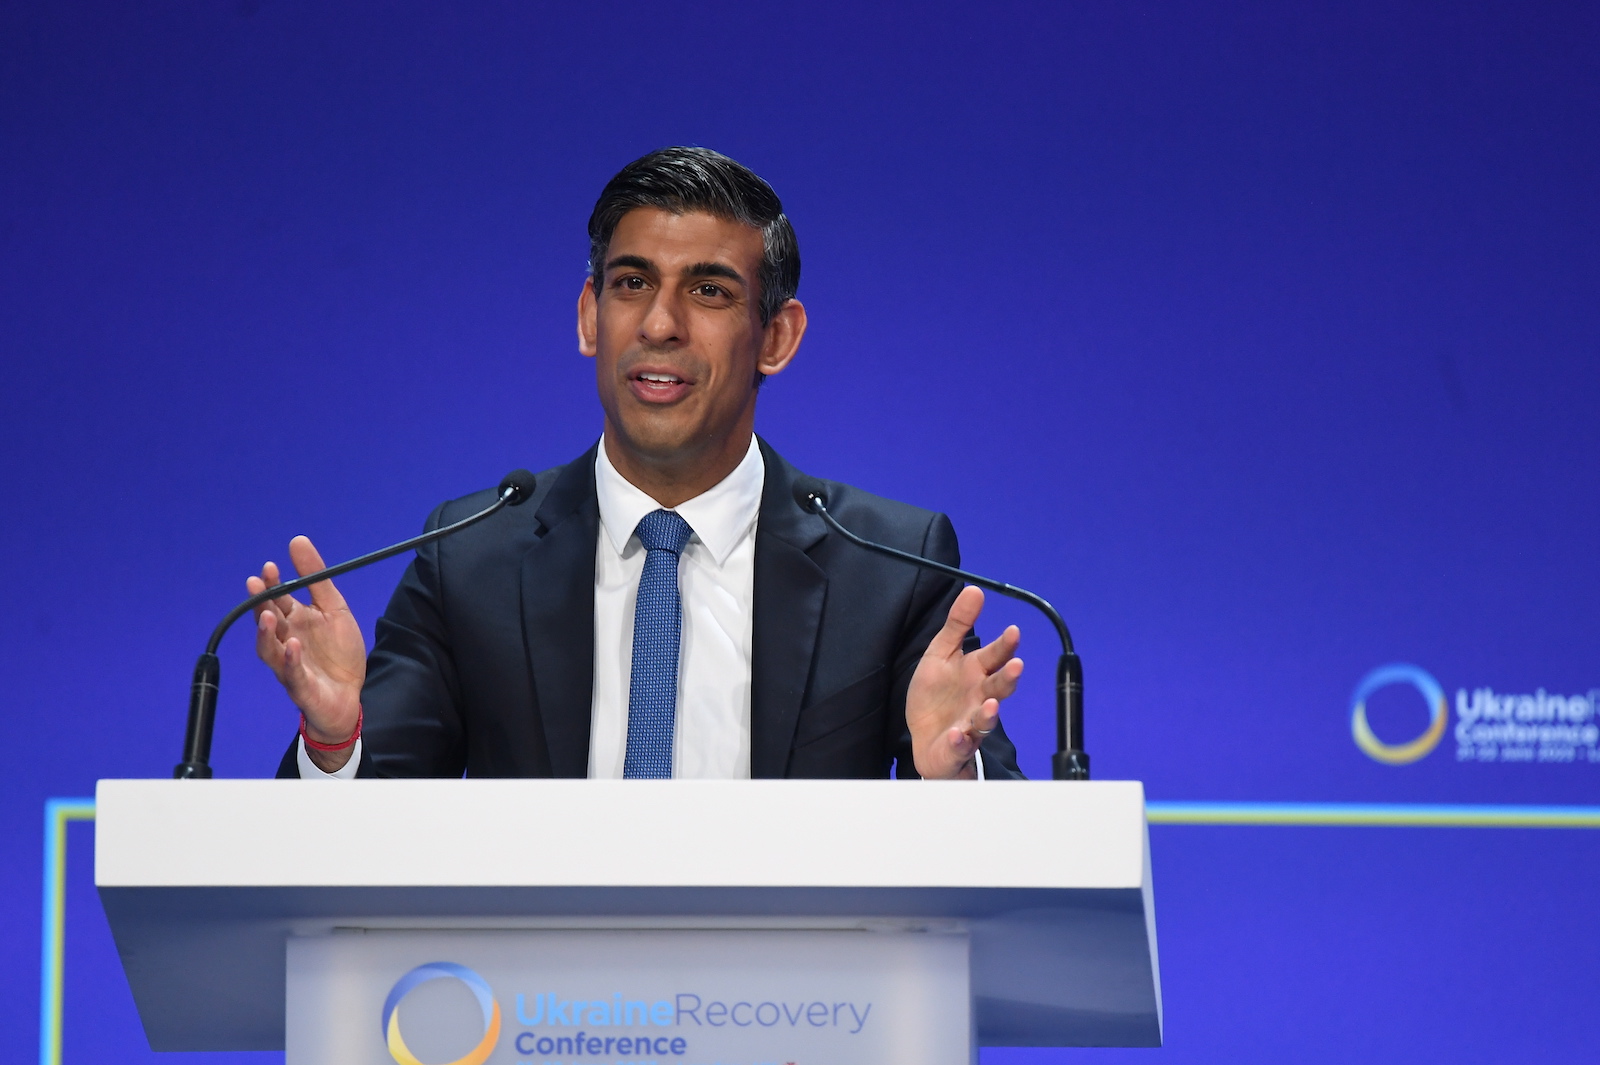 epa10703390 British Prime Minister Rishi Sunak speaks at the opening session of the Ukraine Recovery Conference (URC) in London, Britain, 21 June 2023.  The URC is dedicated to Ukraine's transformation and was symbolically launched in London in 2017 as the Ukraine Reform Conference. URC 2023 will focus on mobilising international support for Ukraine's economic and social stabilisation and recovery from the effects of war.  EPA/ANDY RAIN / POOL